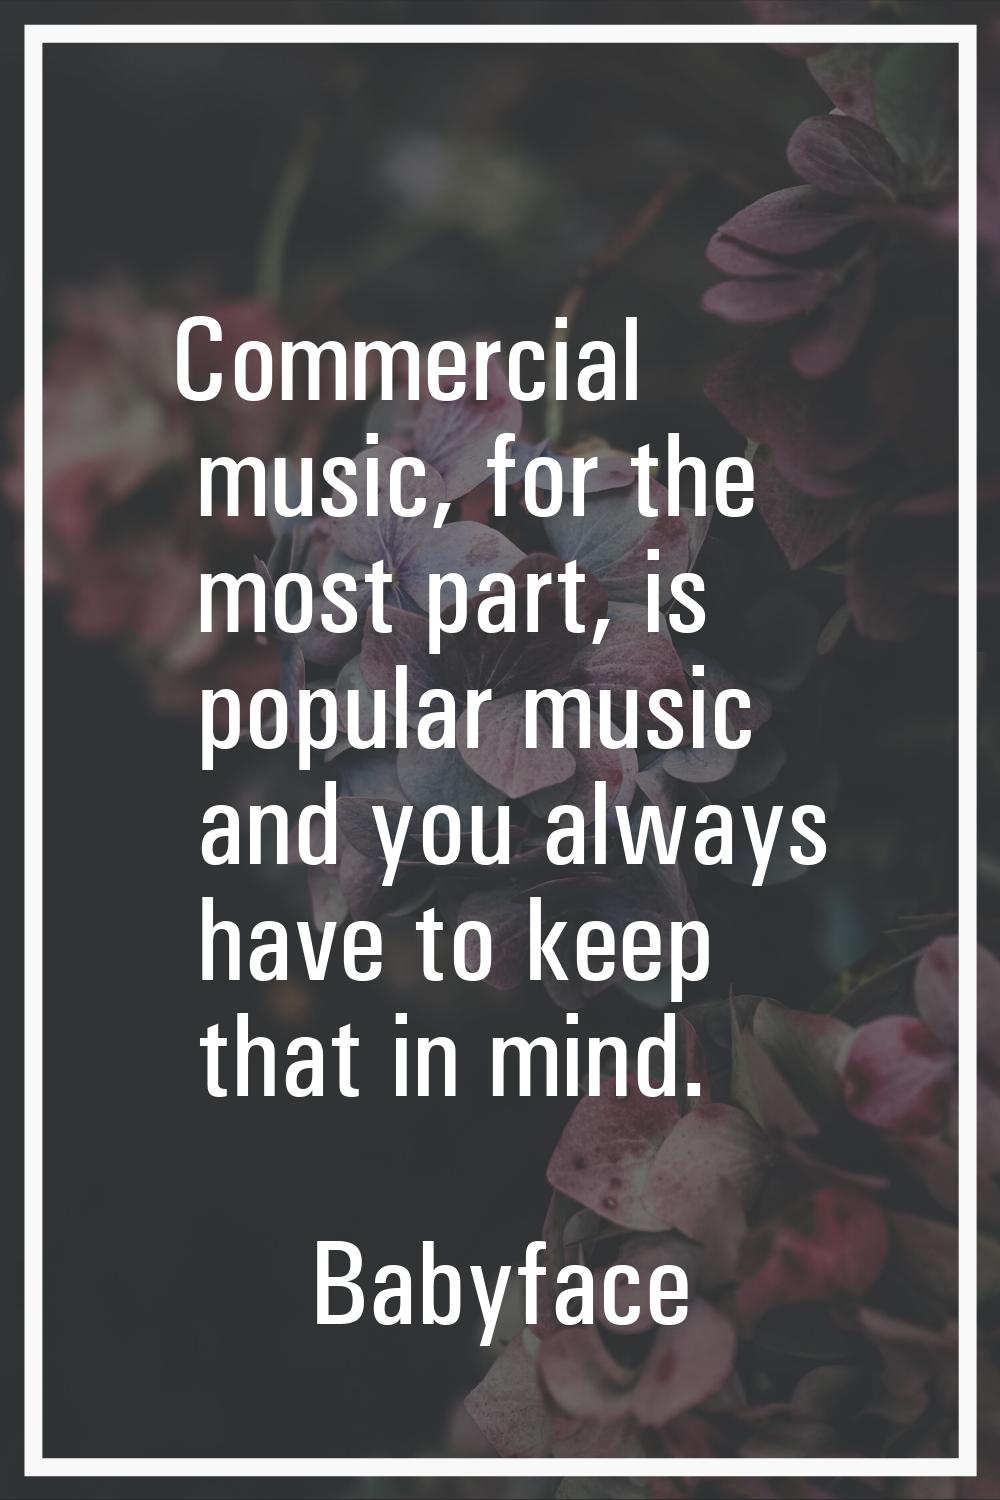 Commercial music, for the most part, is popular music and you always have to keep that in mind.